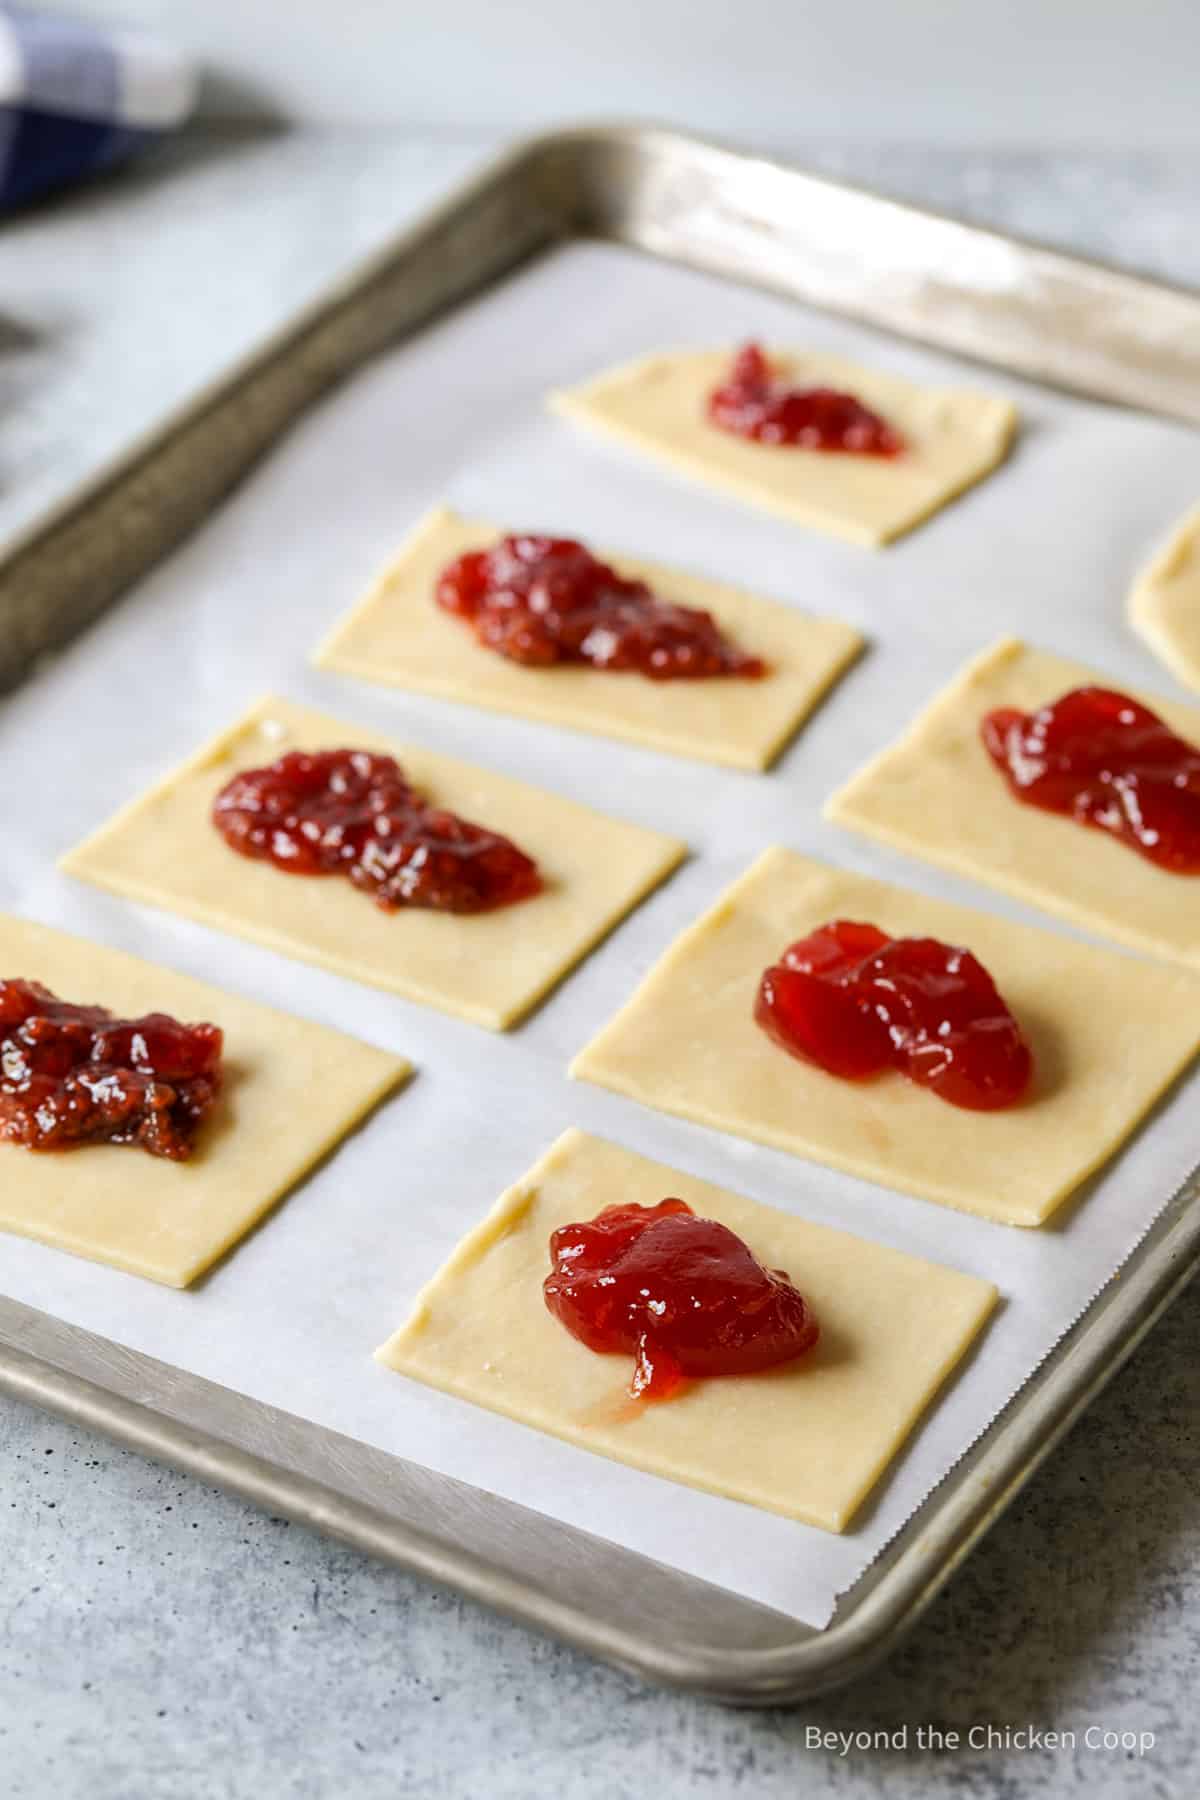 Pastry dough topped with a dollop of jam.